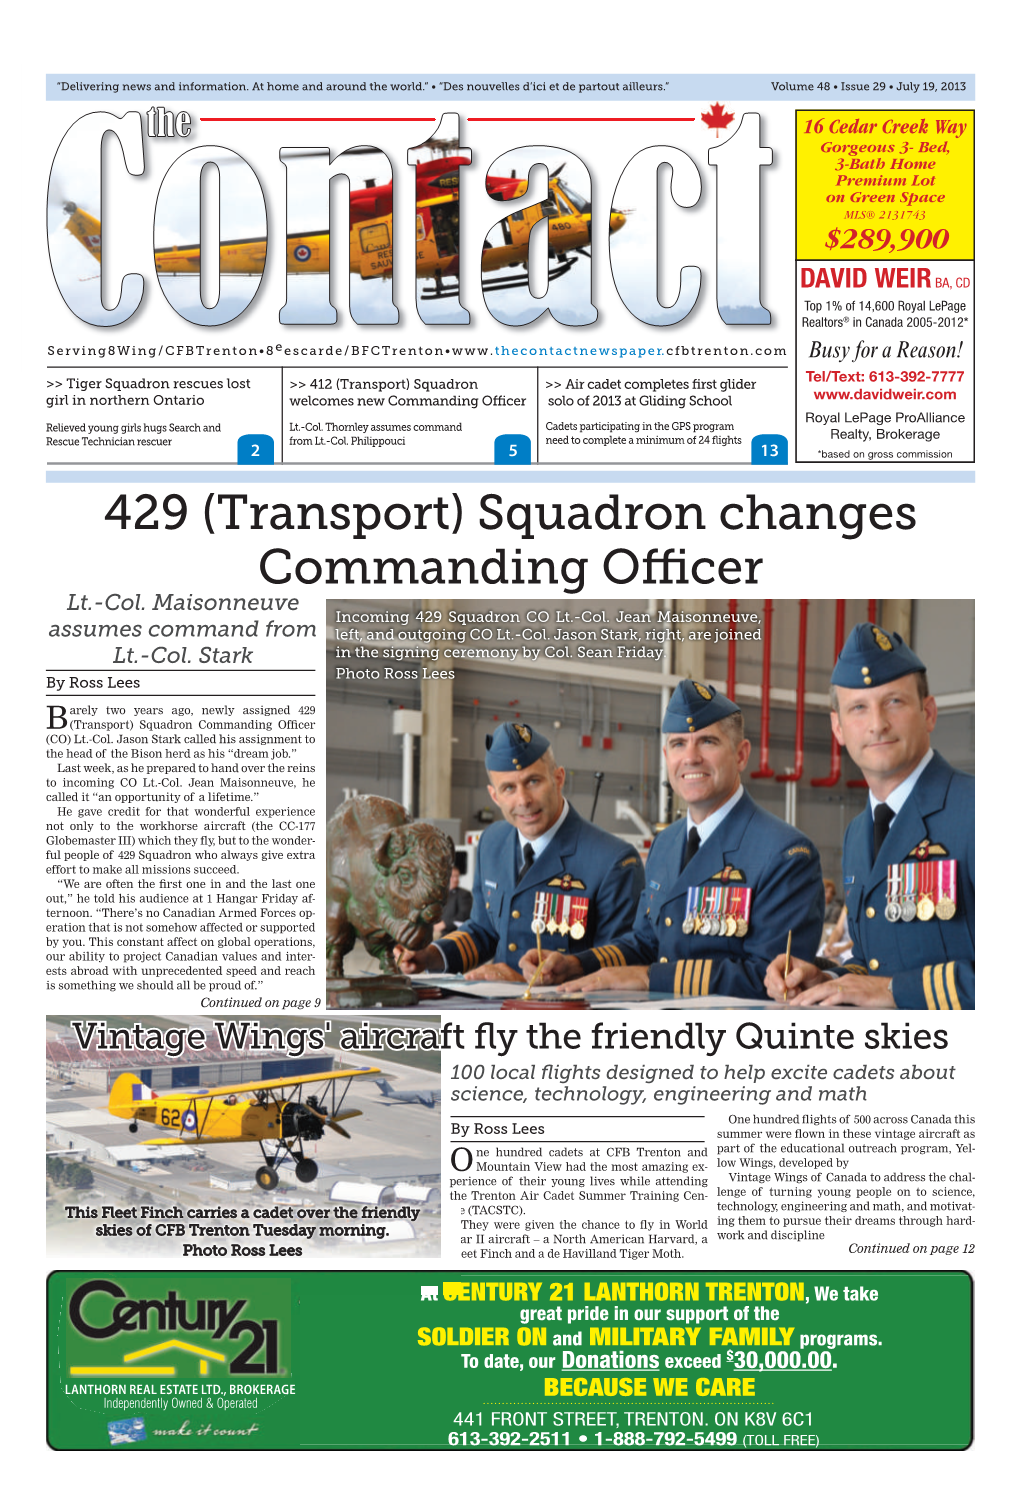 Squadron Changes Commanding Officer